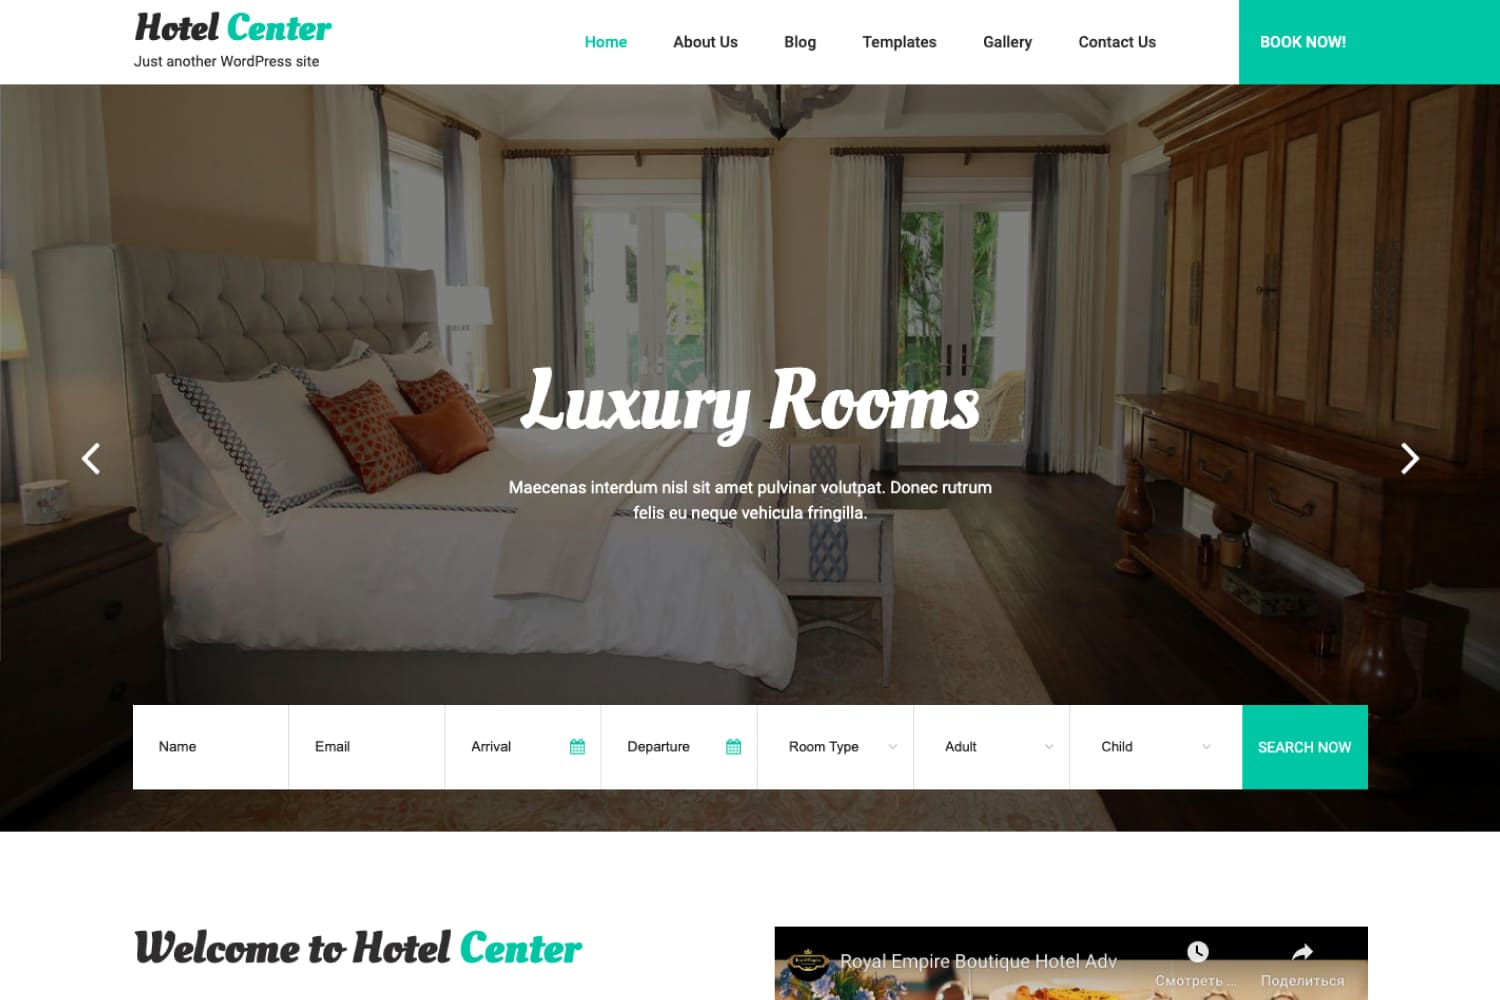 The main page of the hotel website with a photo of the room and a booking block.